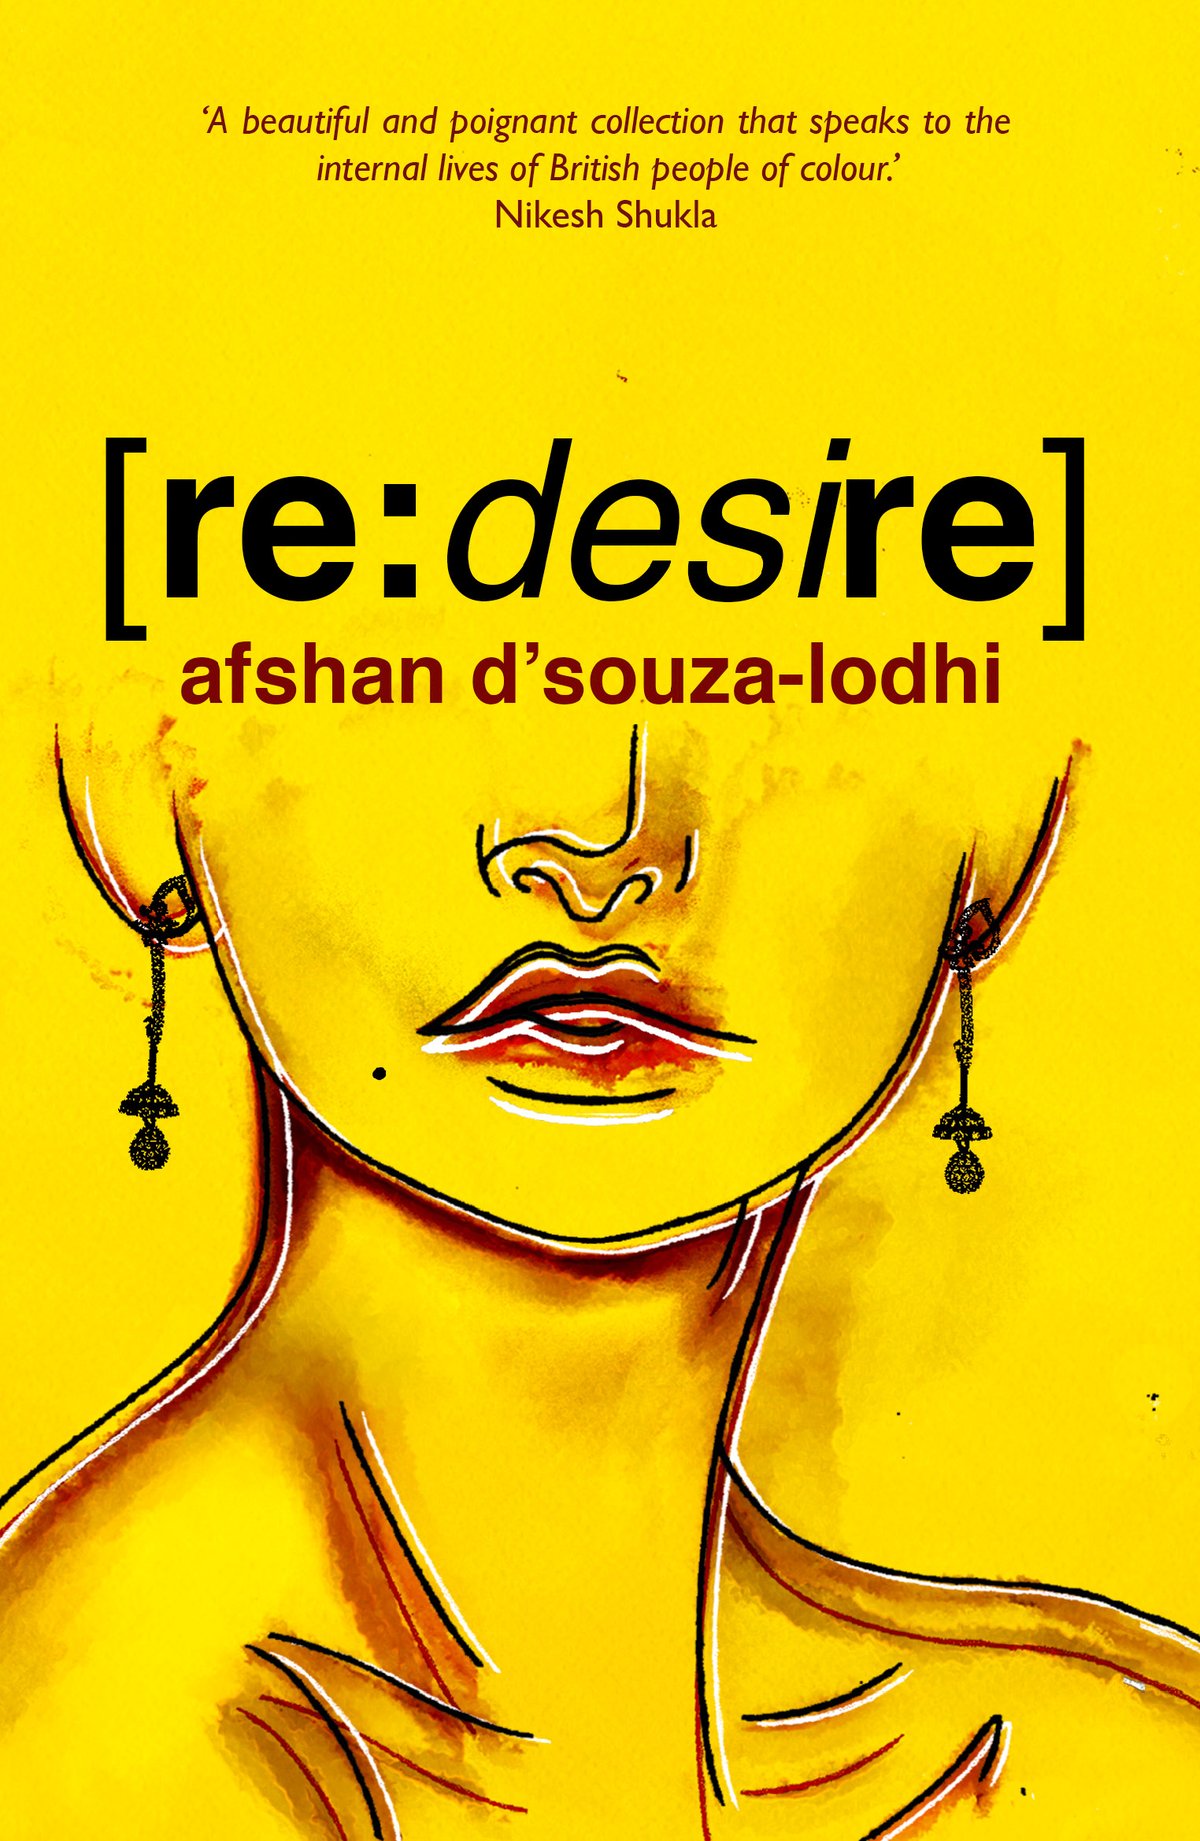 Image of [re:desire] by afshan d'souza-lodhi